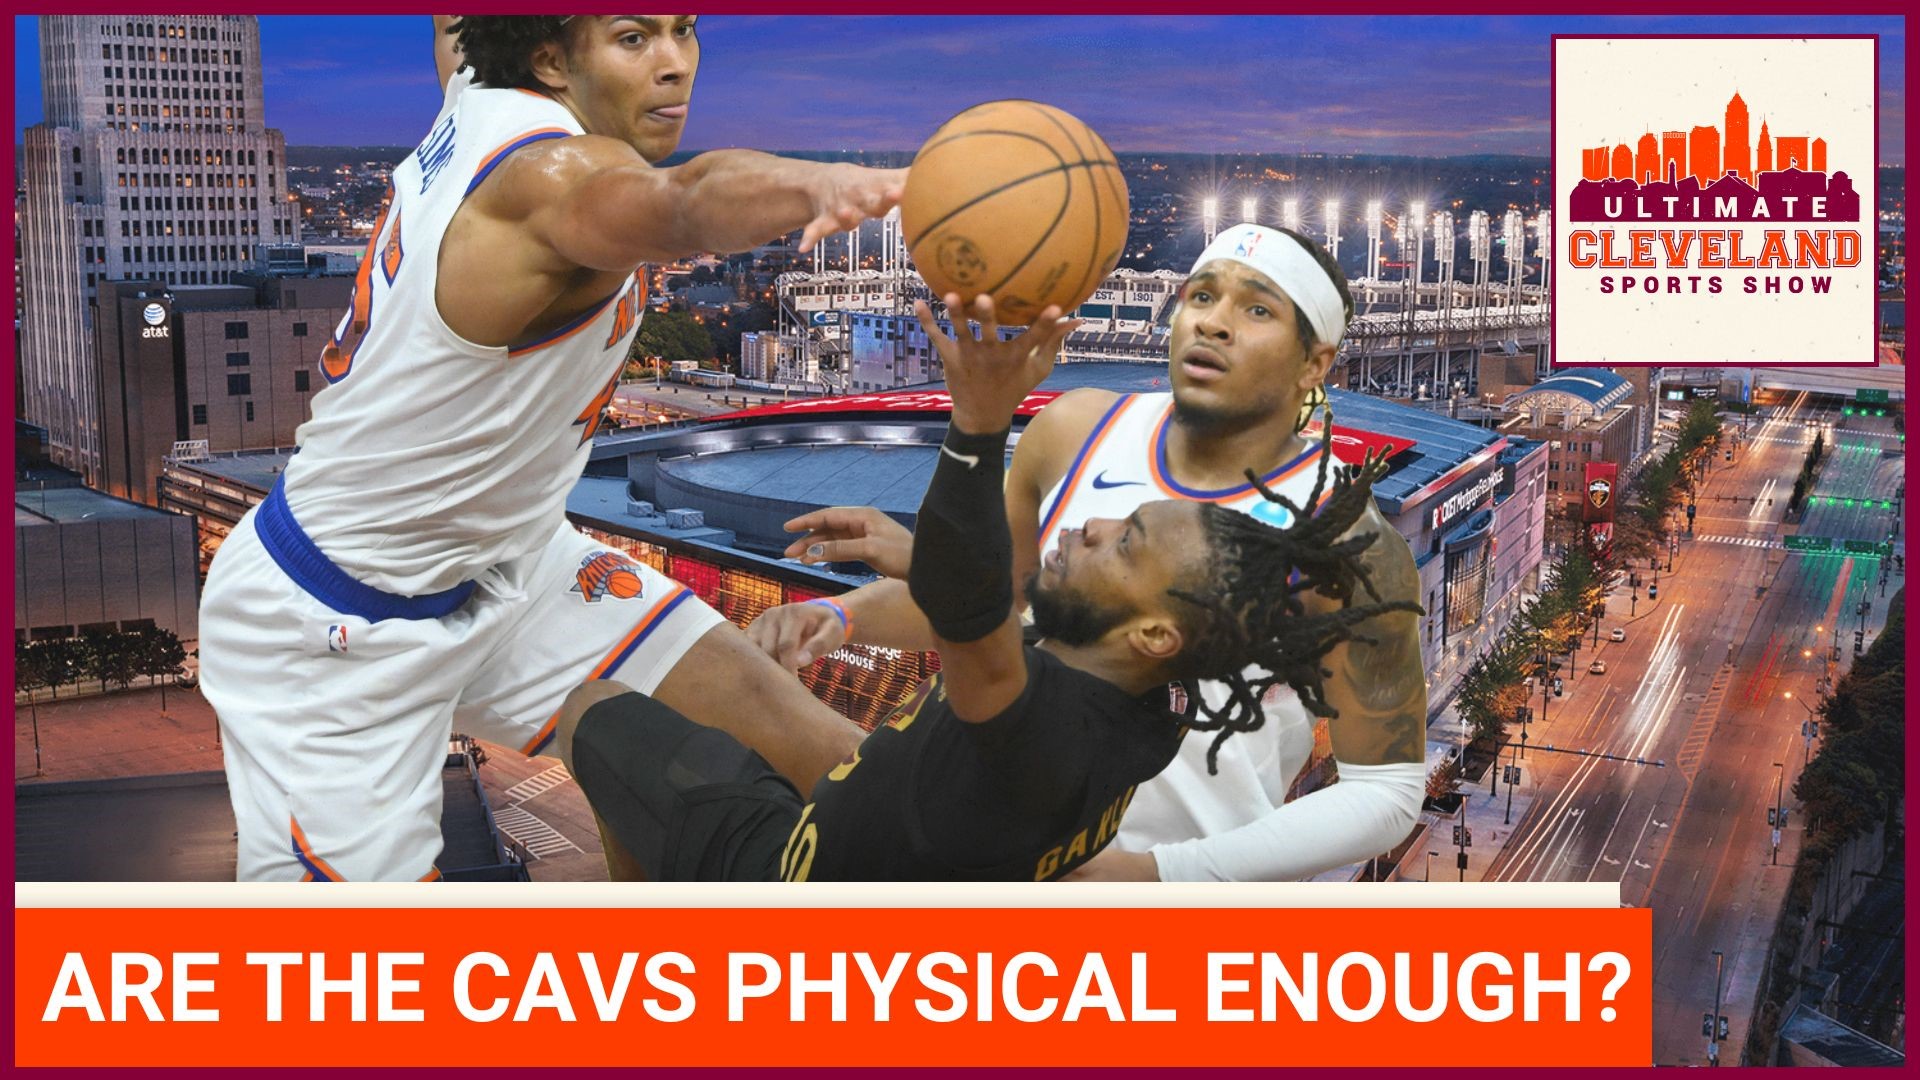 UCSS discusses how free throw attempts is down throughout the NBA and how it impacts the Cavs